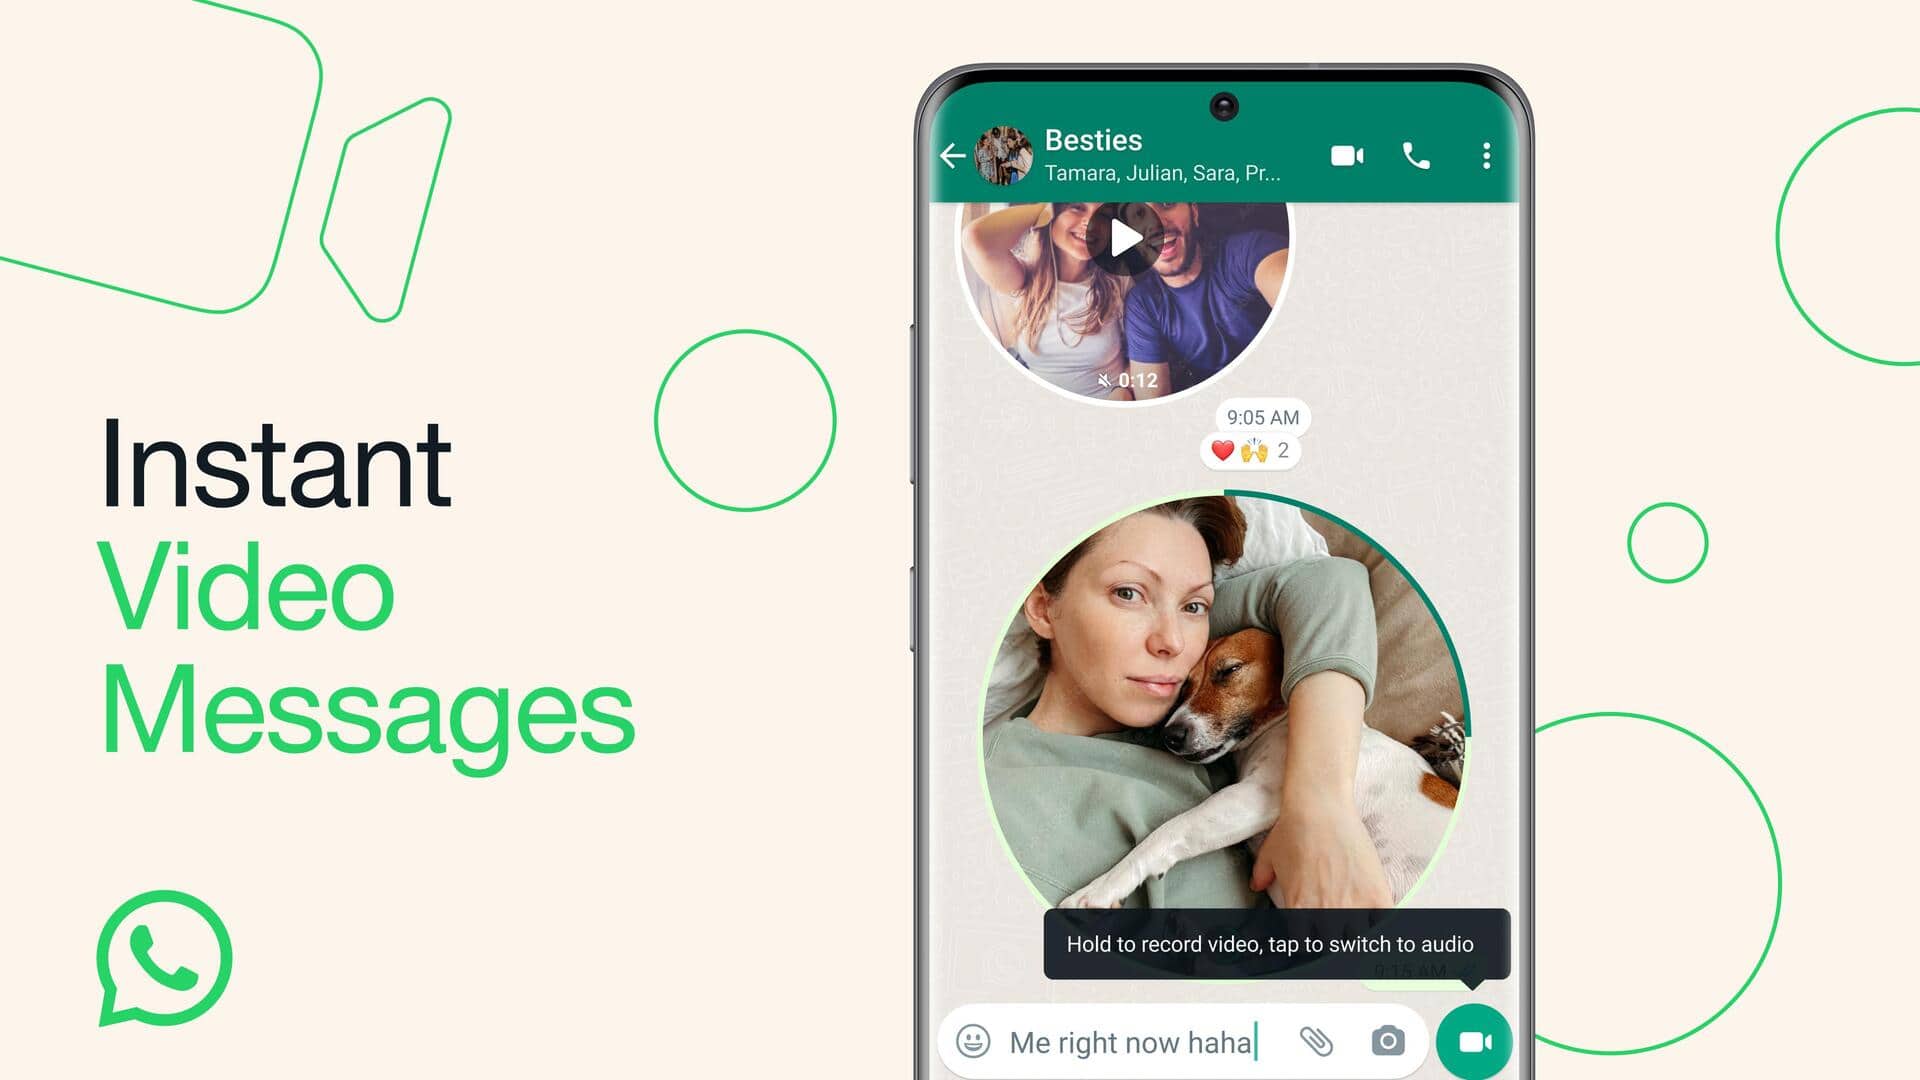 WhatsApp introduces menu to toggle between audio and video messages